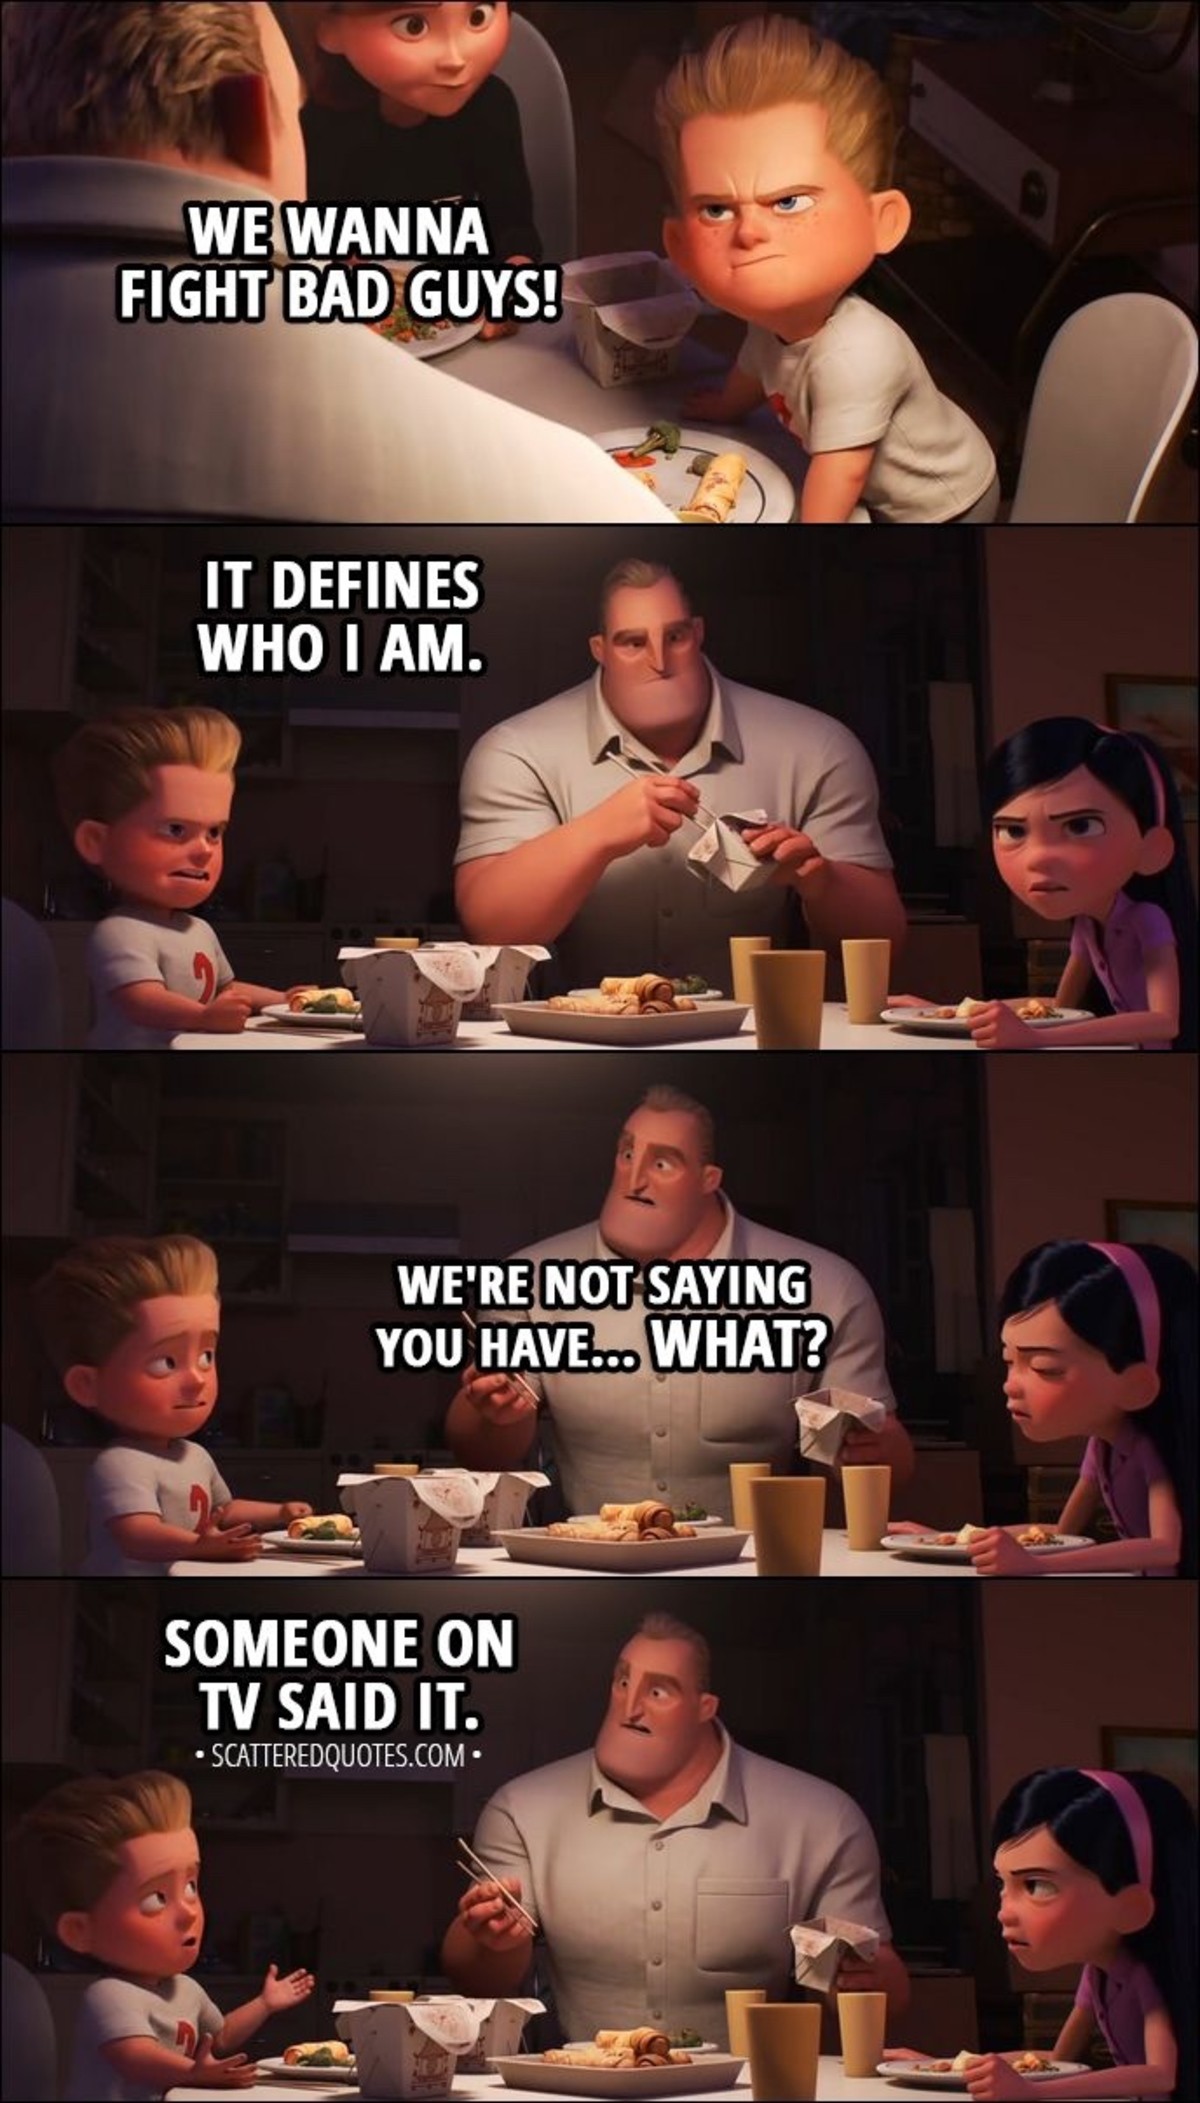 The Incredibles / Memes - TV Tropes